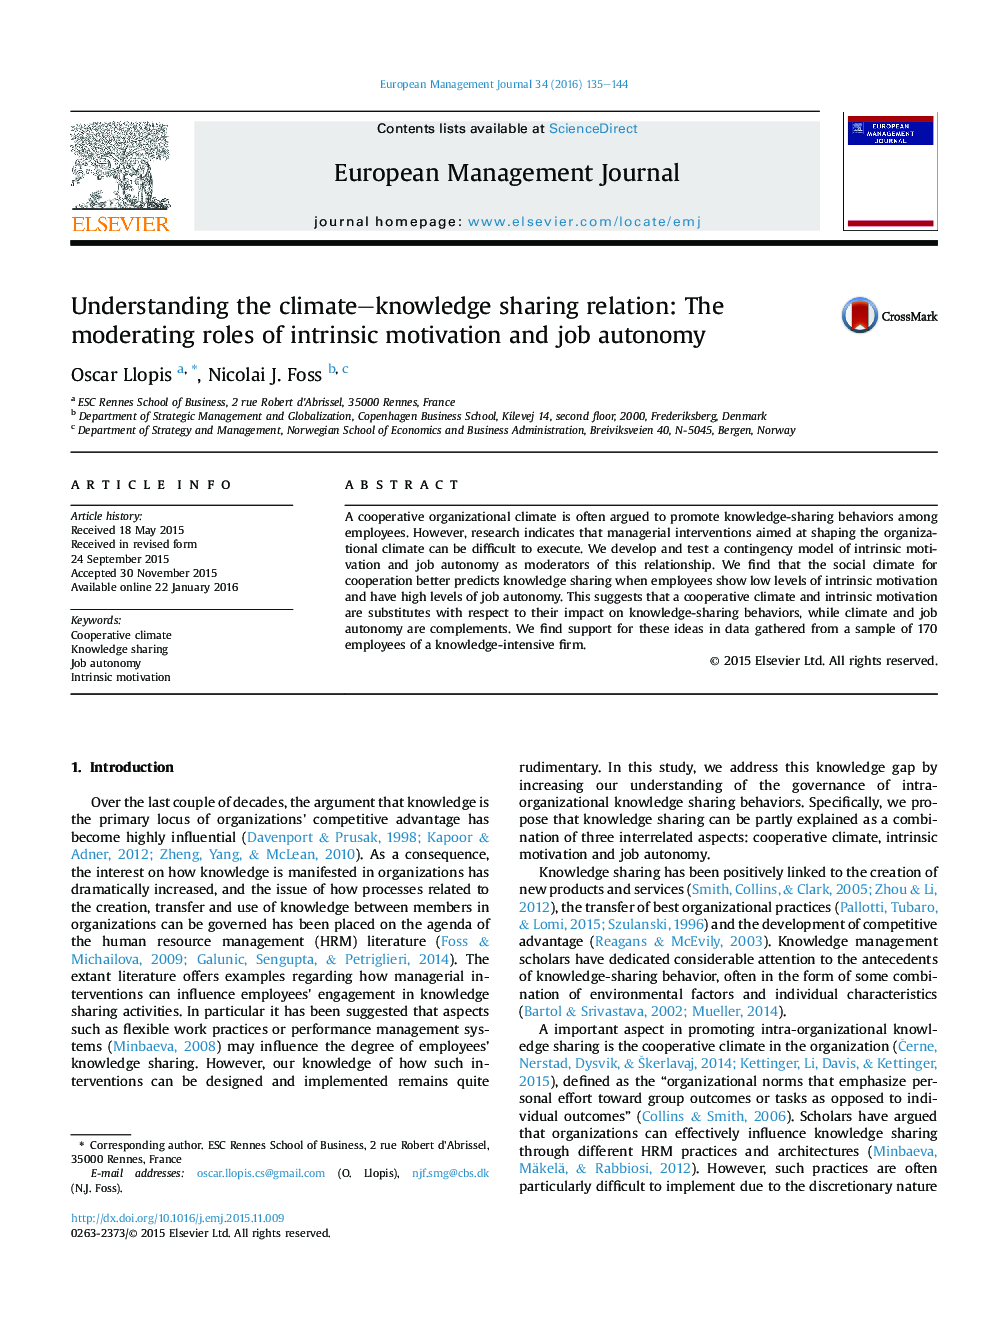 Understanding the climate–knowledge sharing relation: The moderating roles of intrinsic motivation and job autonomy